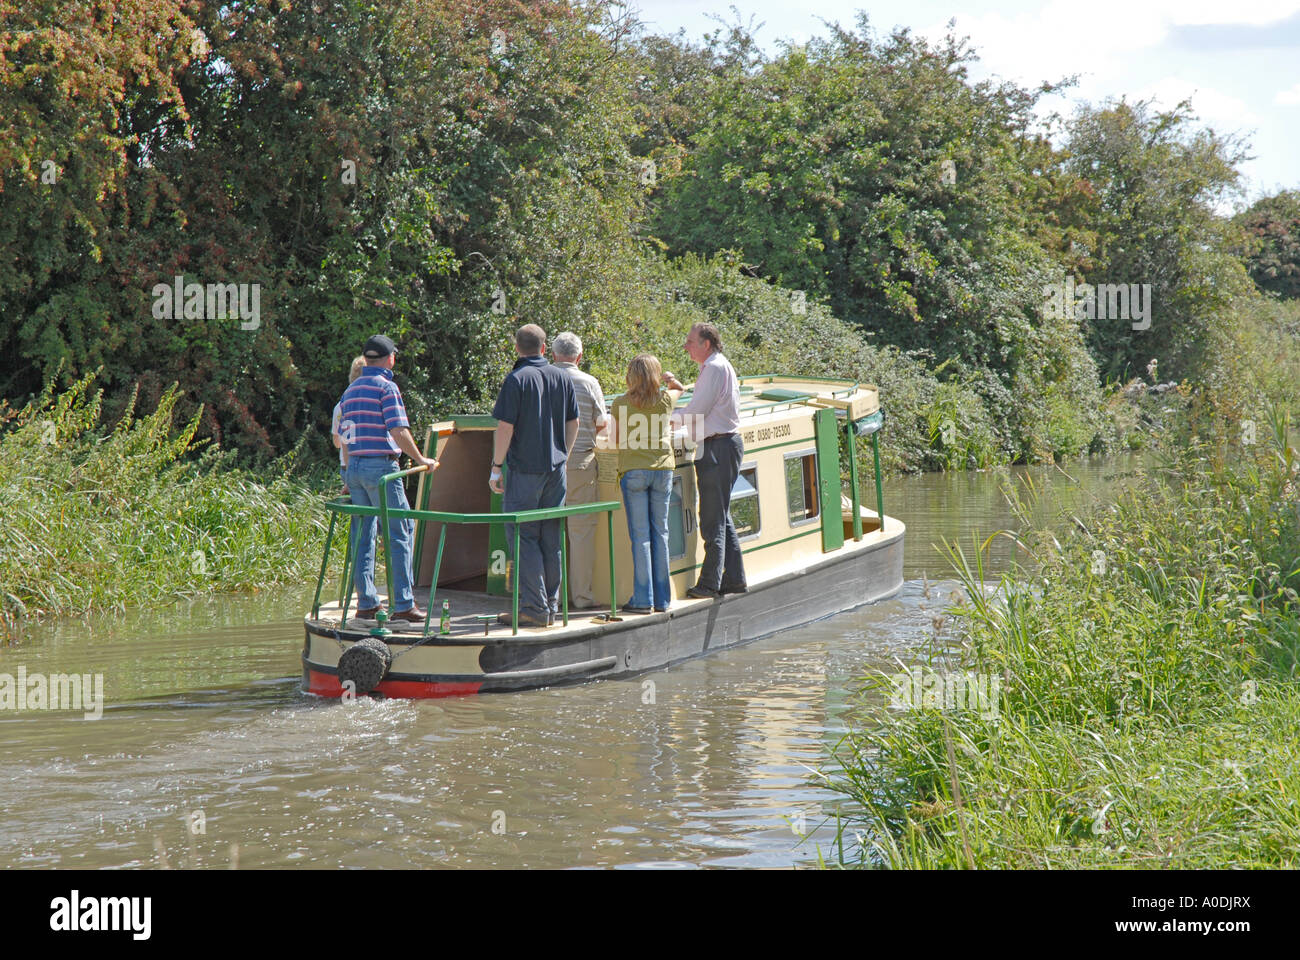 Family enjoying day out on hired day boat on Kennet & Avon canal in Witshire, England UK Stock Photo